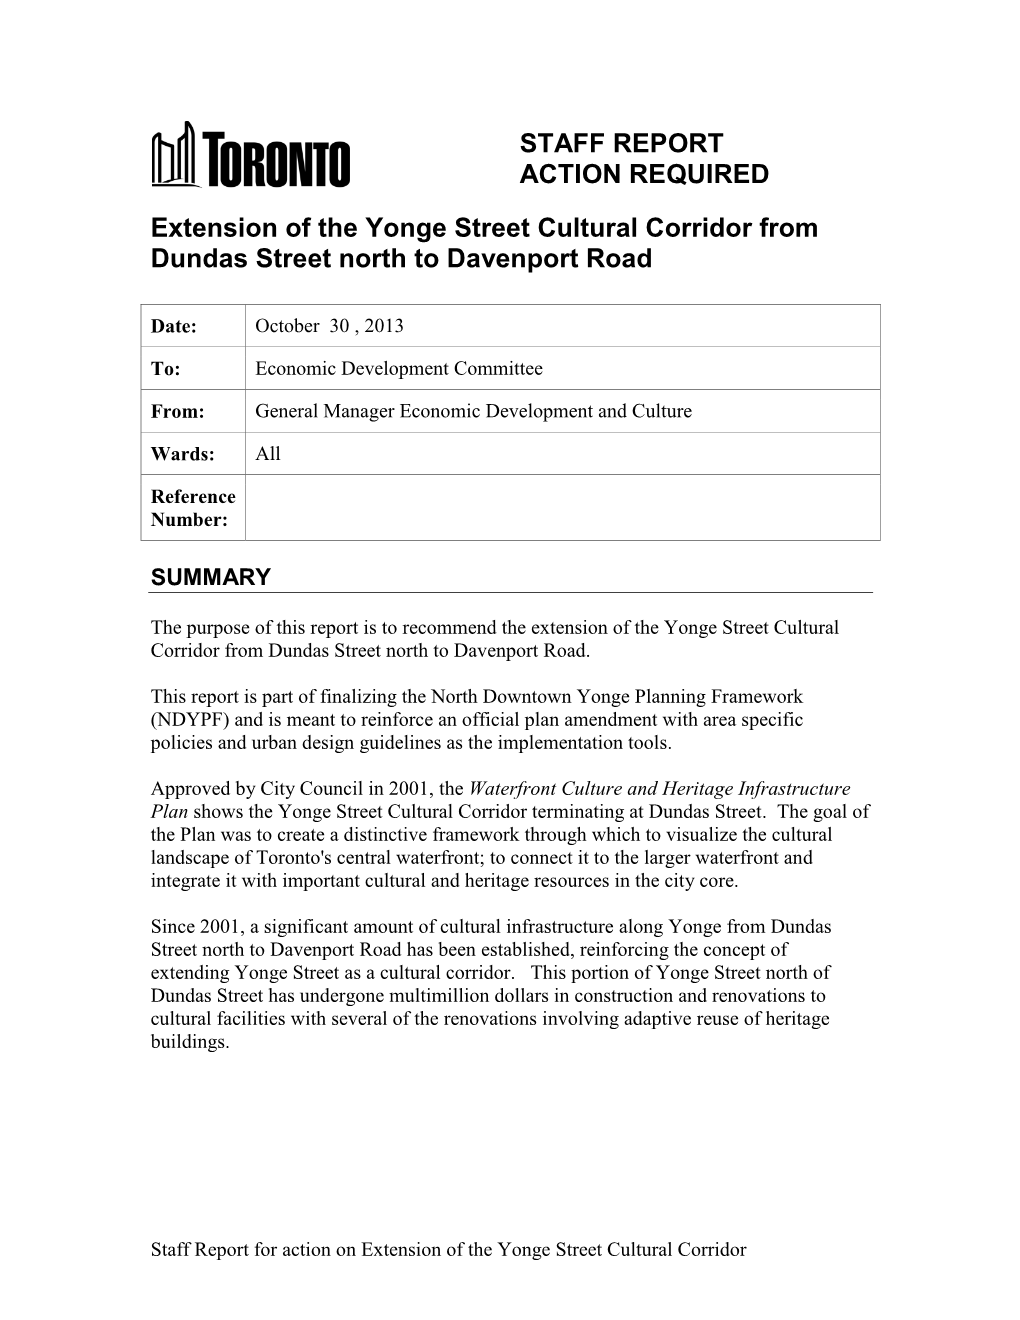 STAFF REPORT ACTION REQUIRED Extension of the Yonge Street Cultural Corridor from Dundas Street North to Davenport Road